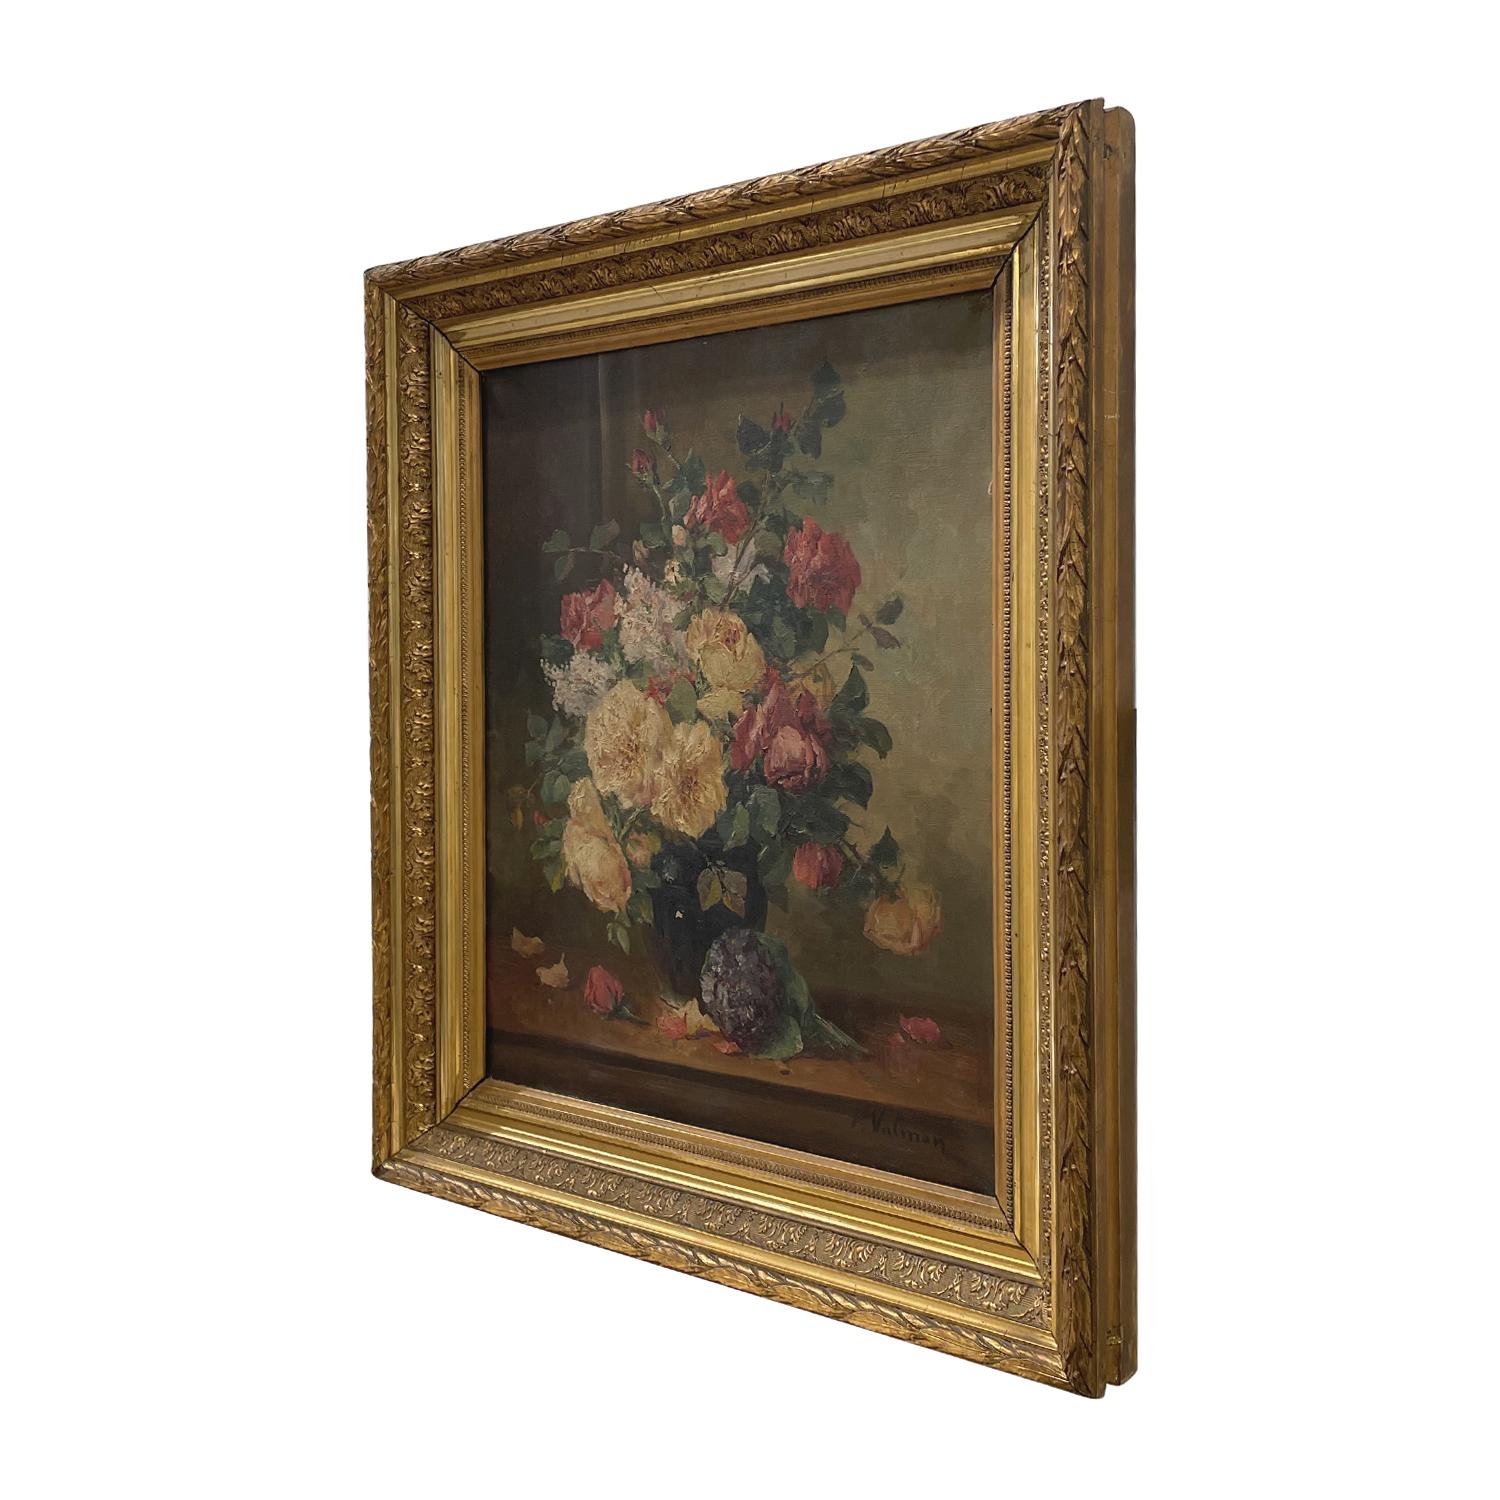 A red-yellow, antique French still life oil on canvas painting depicting a working table with a dark-blue vase with flowers, painted by Eugène Henri Cauchois in a hand carved, original gilded stucco wood frame, particularized by leafs, in good